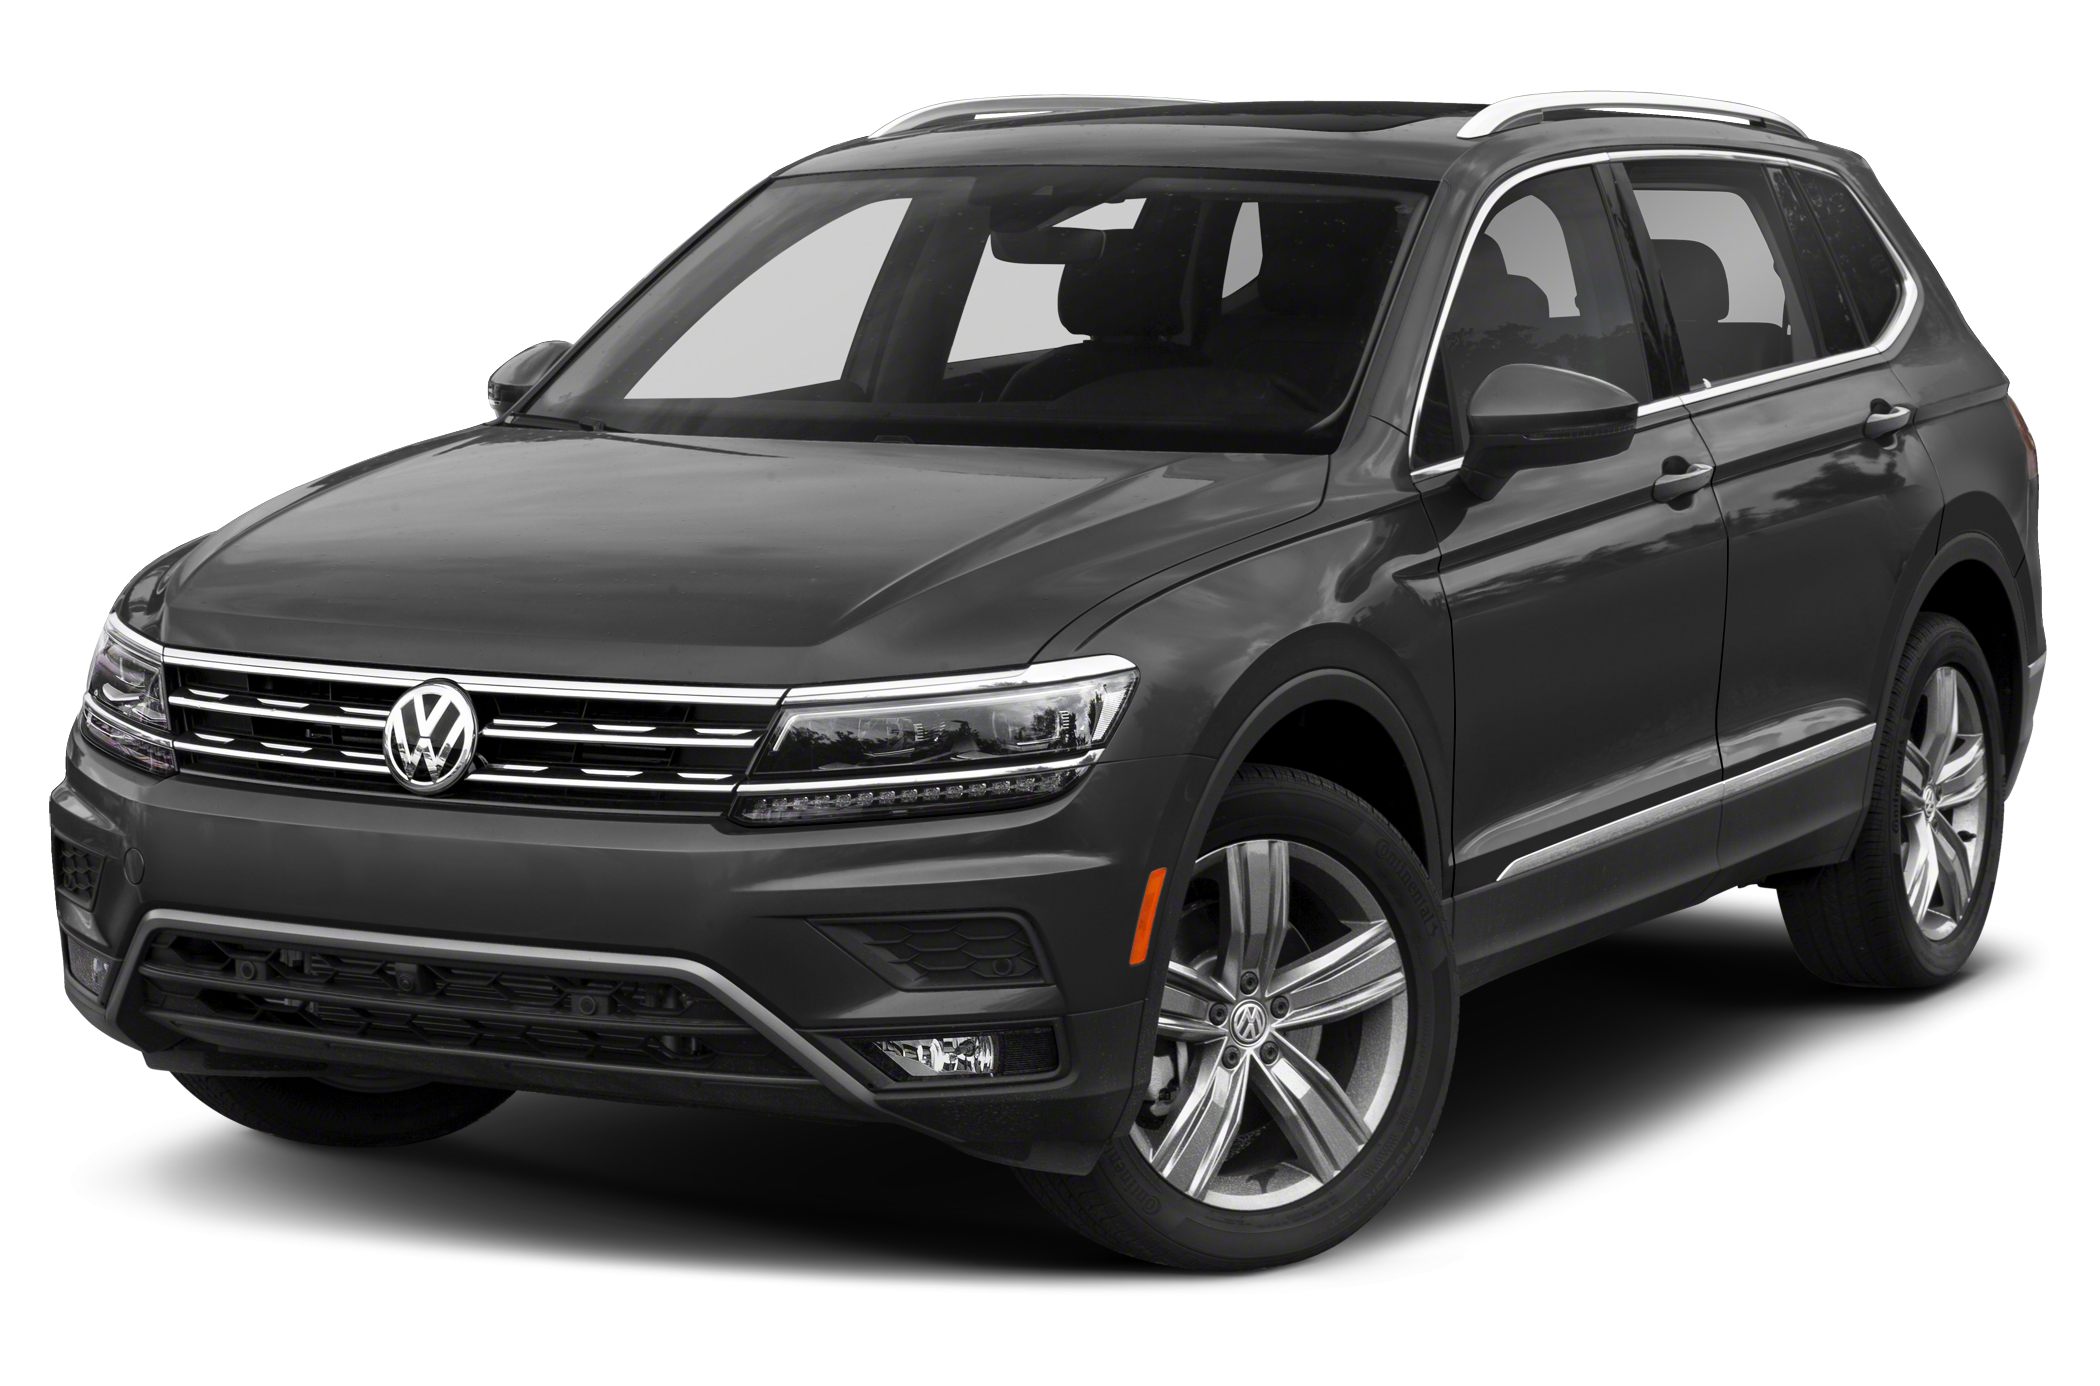 Great Deals on a new 2019 Volkswagen Tiguan 2 0T SEL 4dr All wheel 